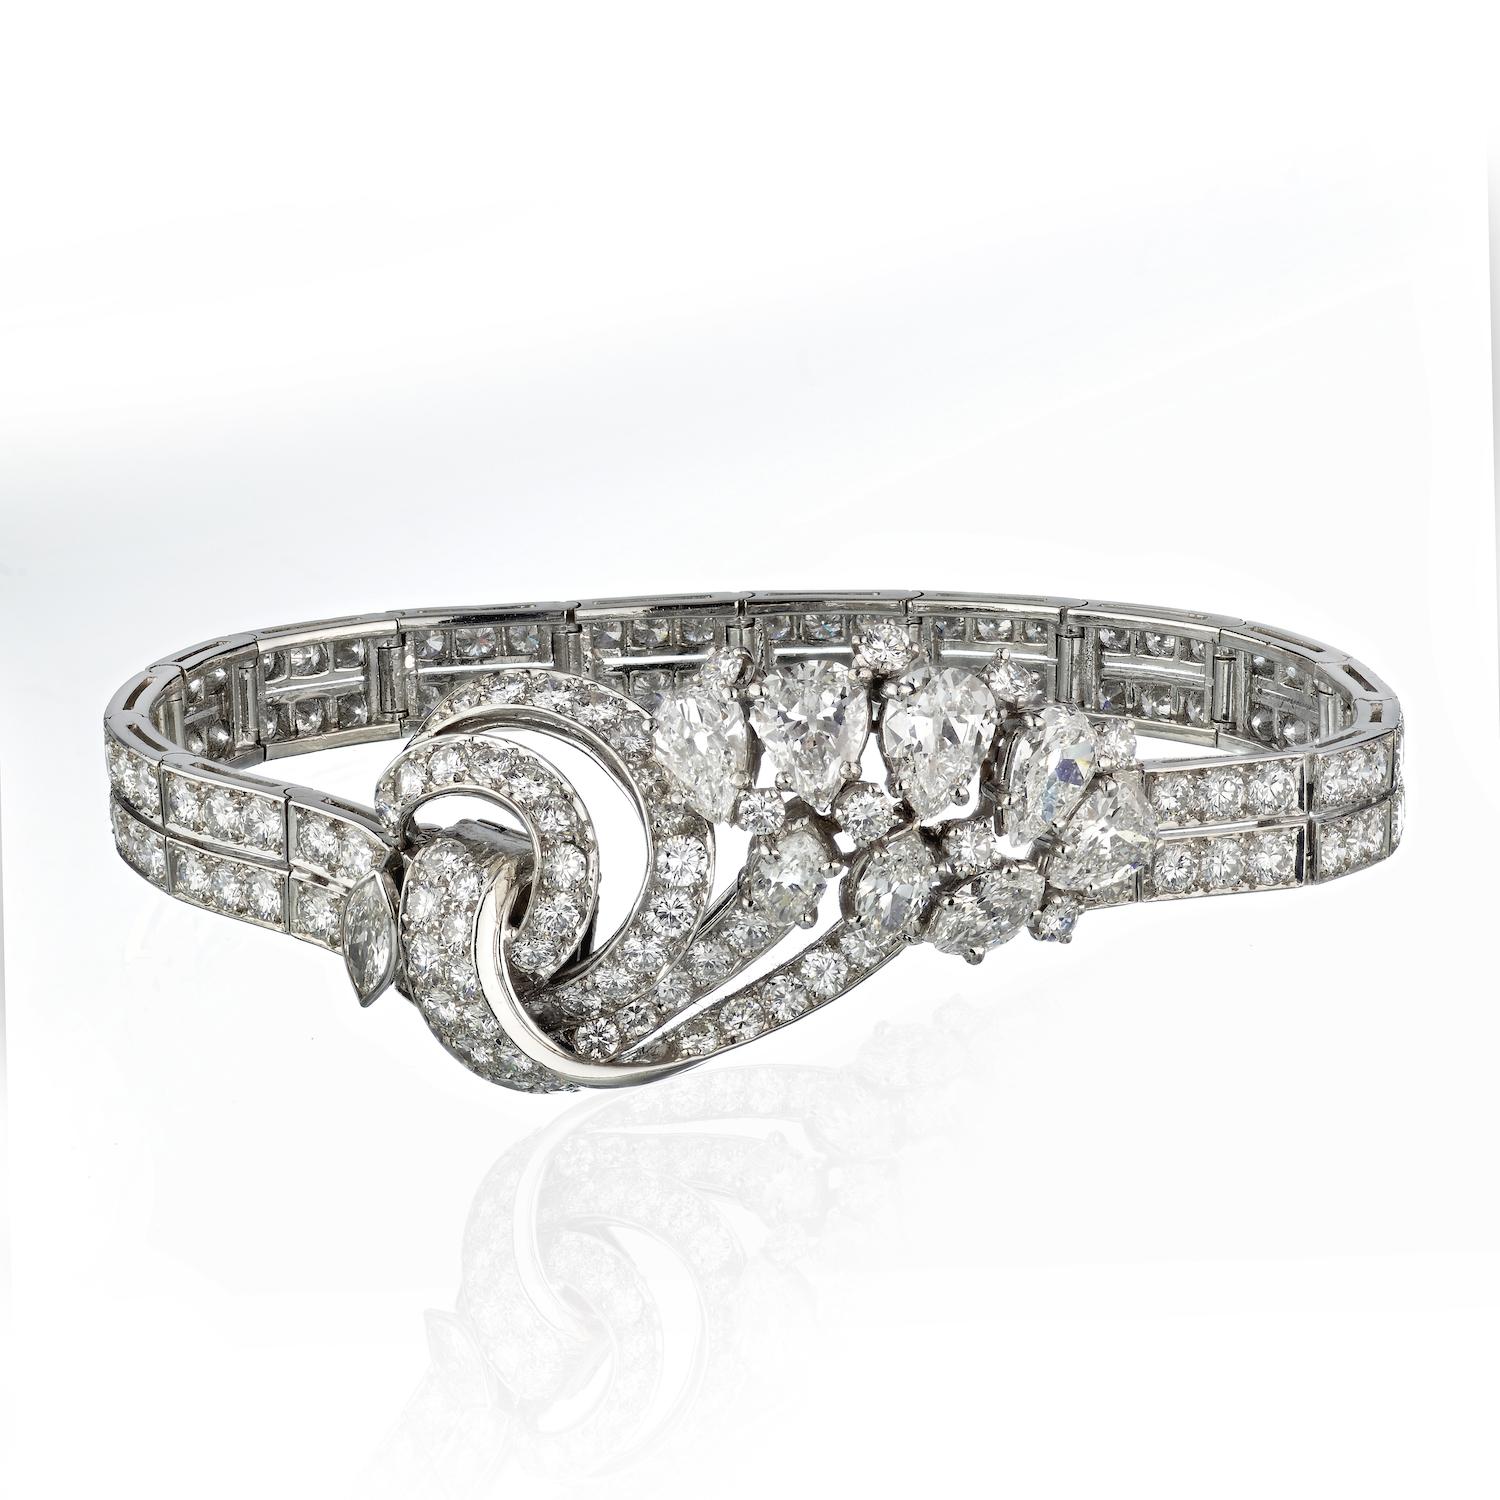 Indulge in the luxury of a bygone era with this exquisite Platinum Diamond Bracelet, adorned with a mesmerizing array of 156 diamonds totaling 13.25 carats. 

The vintage cut round, old cut marquise, and old cut pear diamonds, with their G-H color